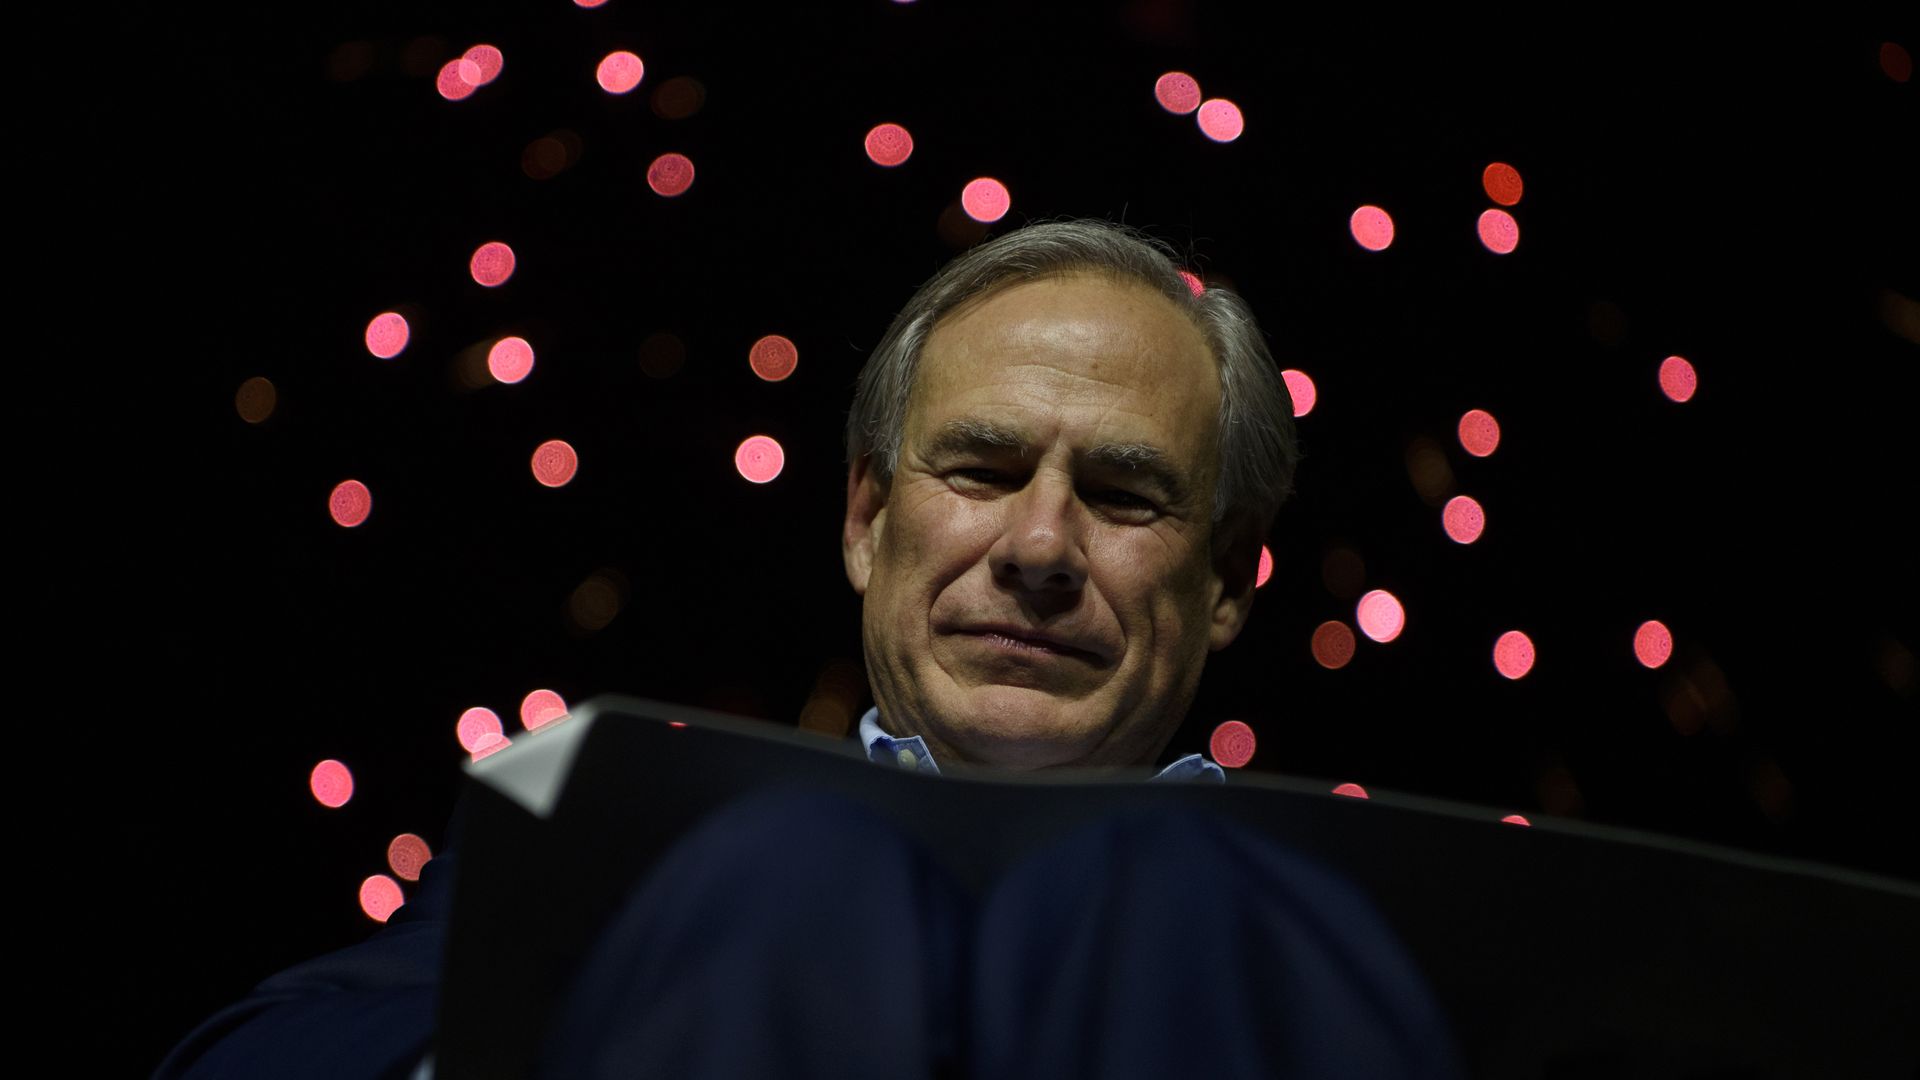 Texas Gov. Greg Abbott's face is visible behind a lectern 